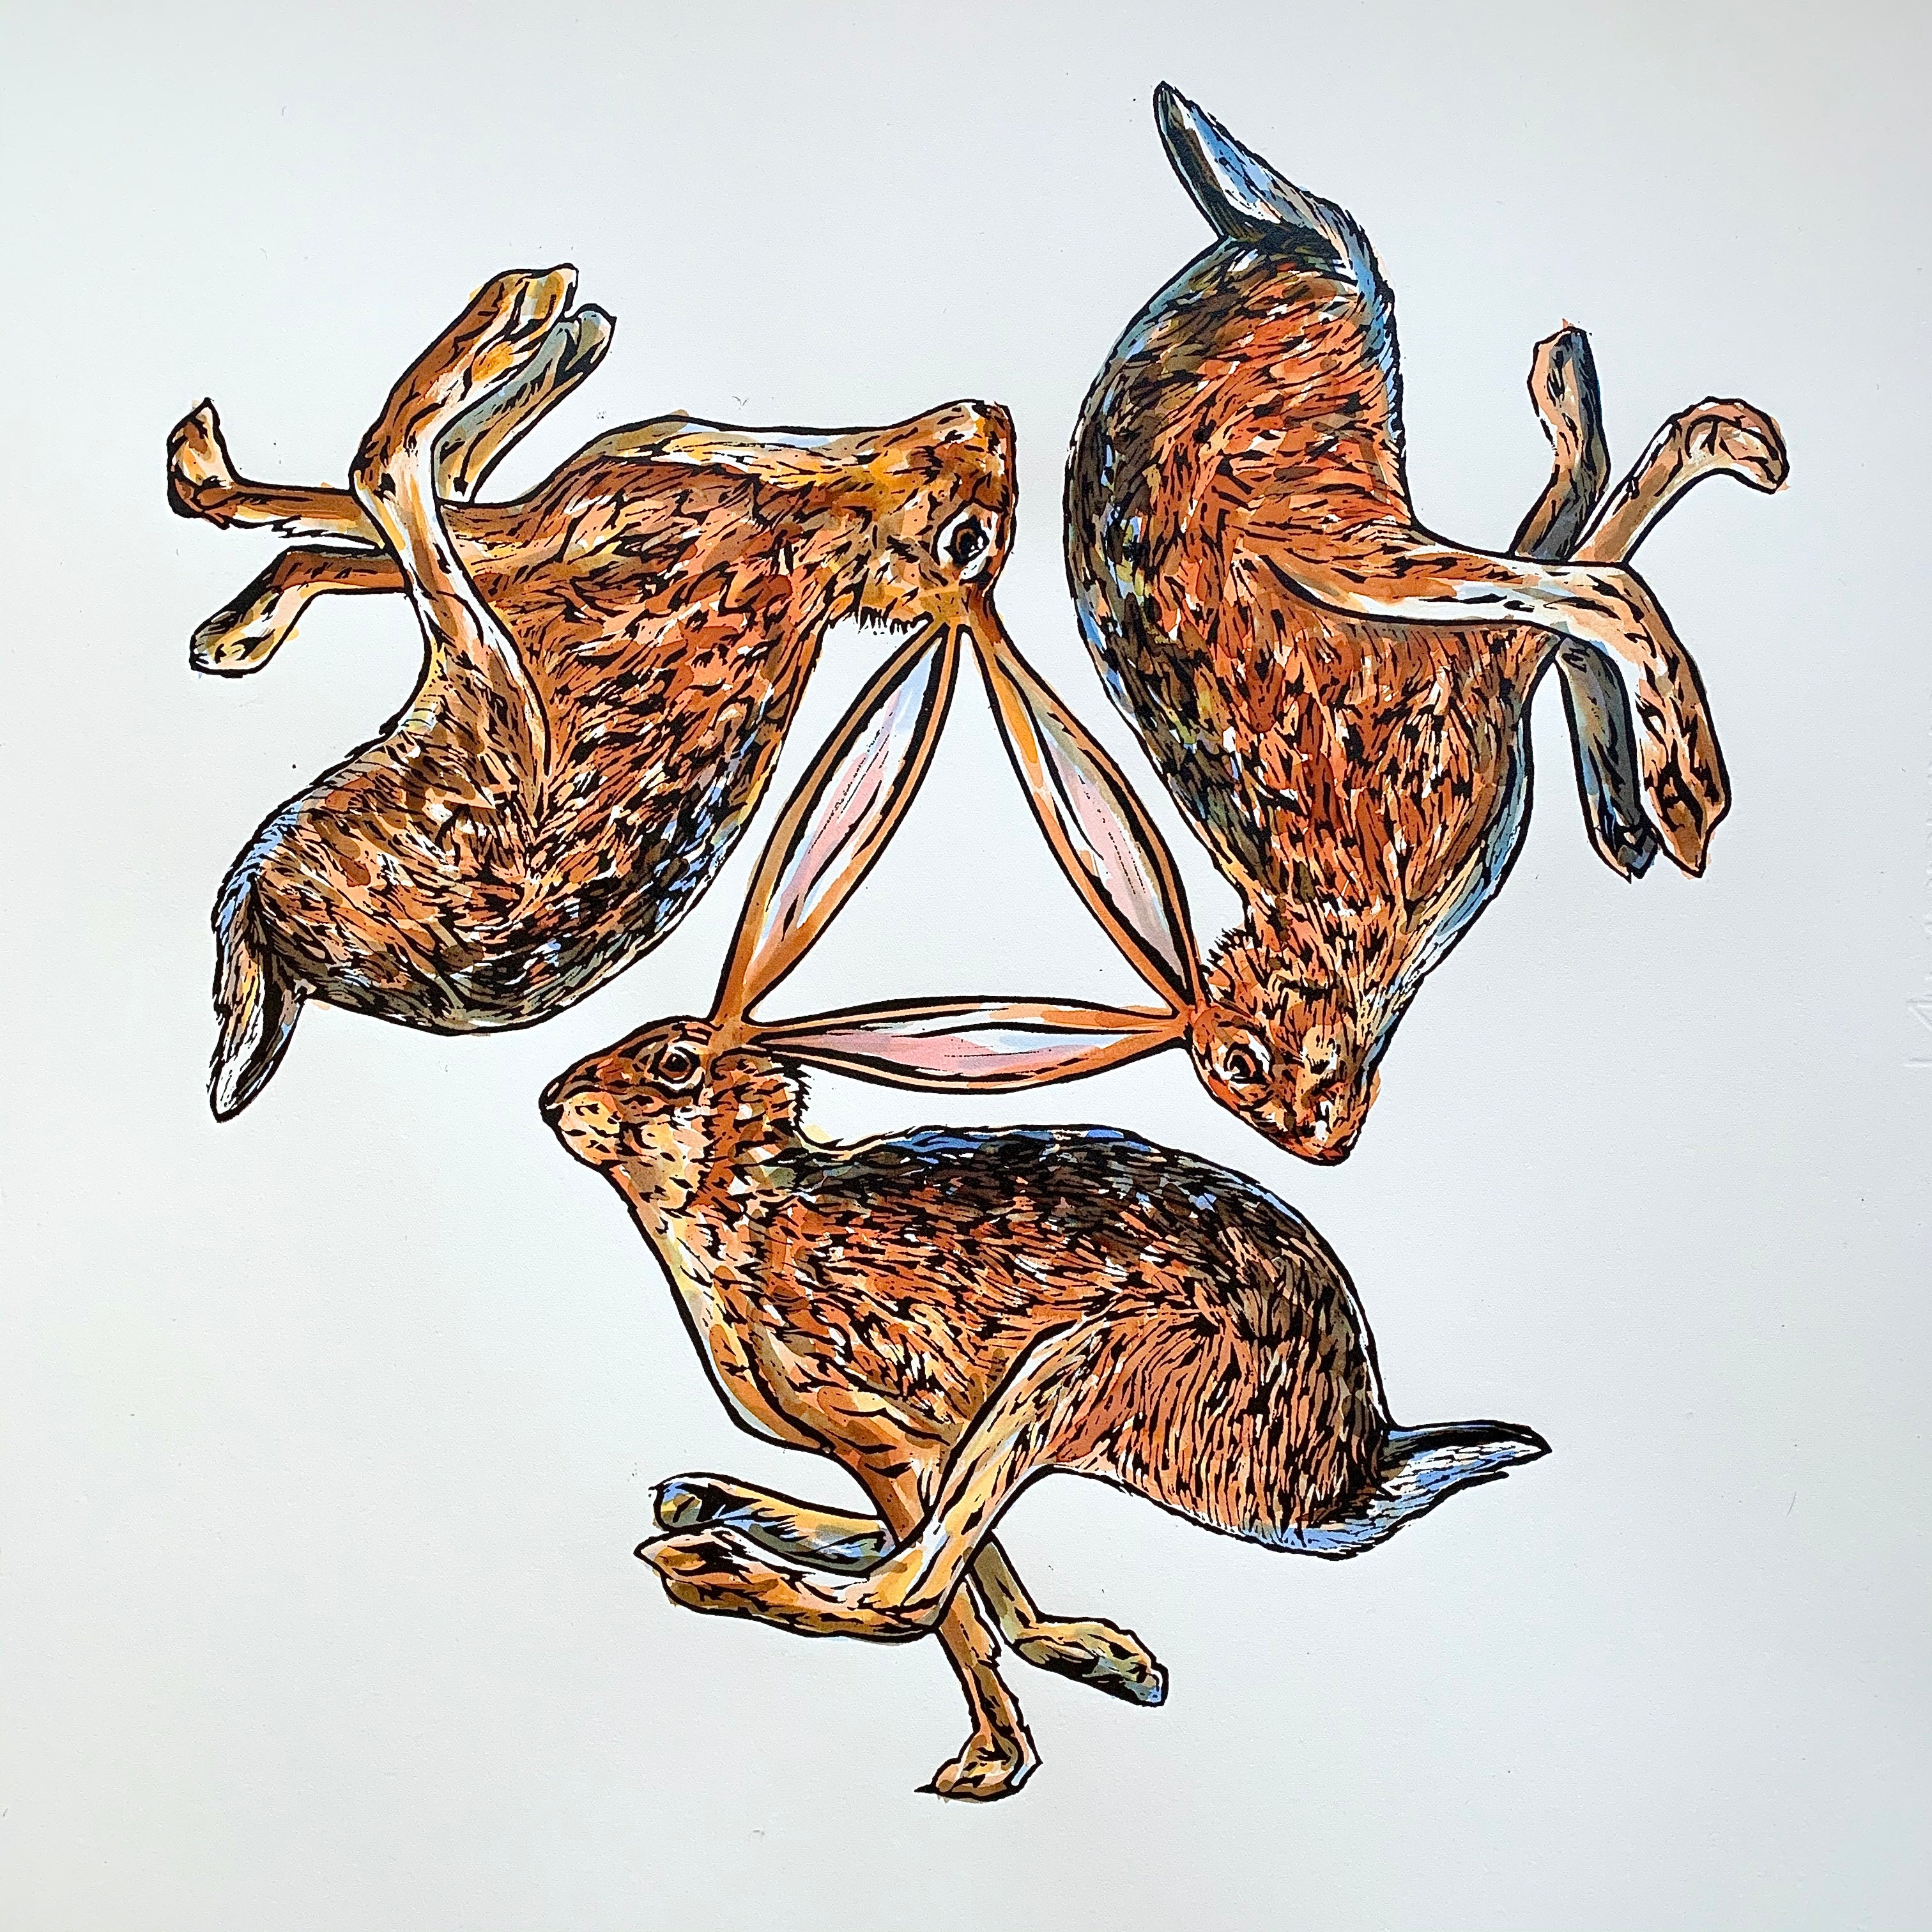 'Tinners’ Hare' - Original Hand Printed, Hand Coloured Linocut by Sarah Cemmick